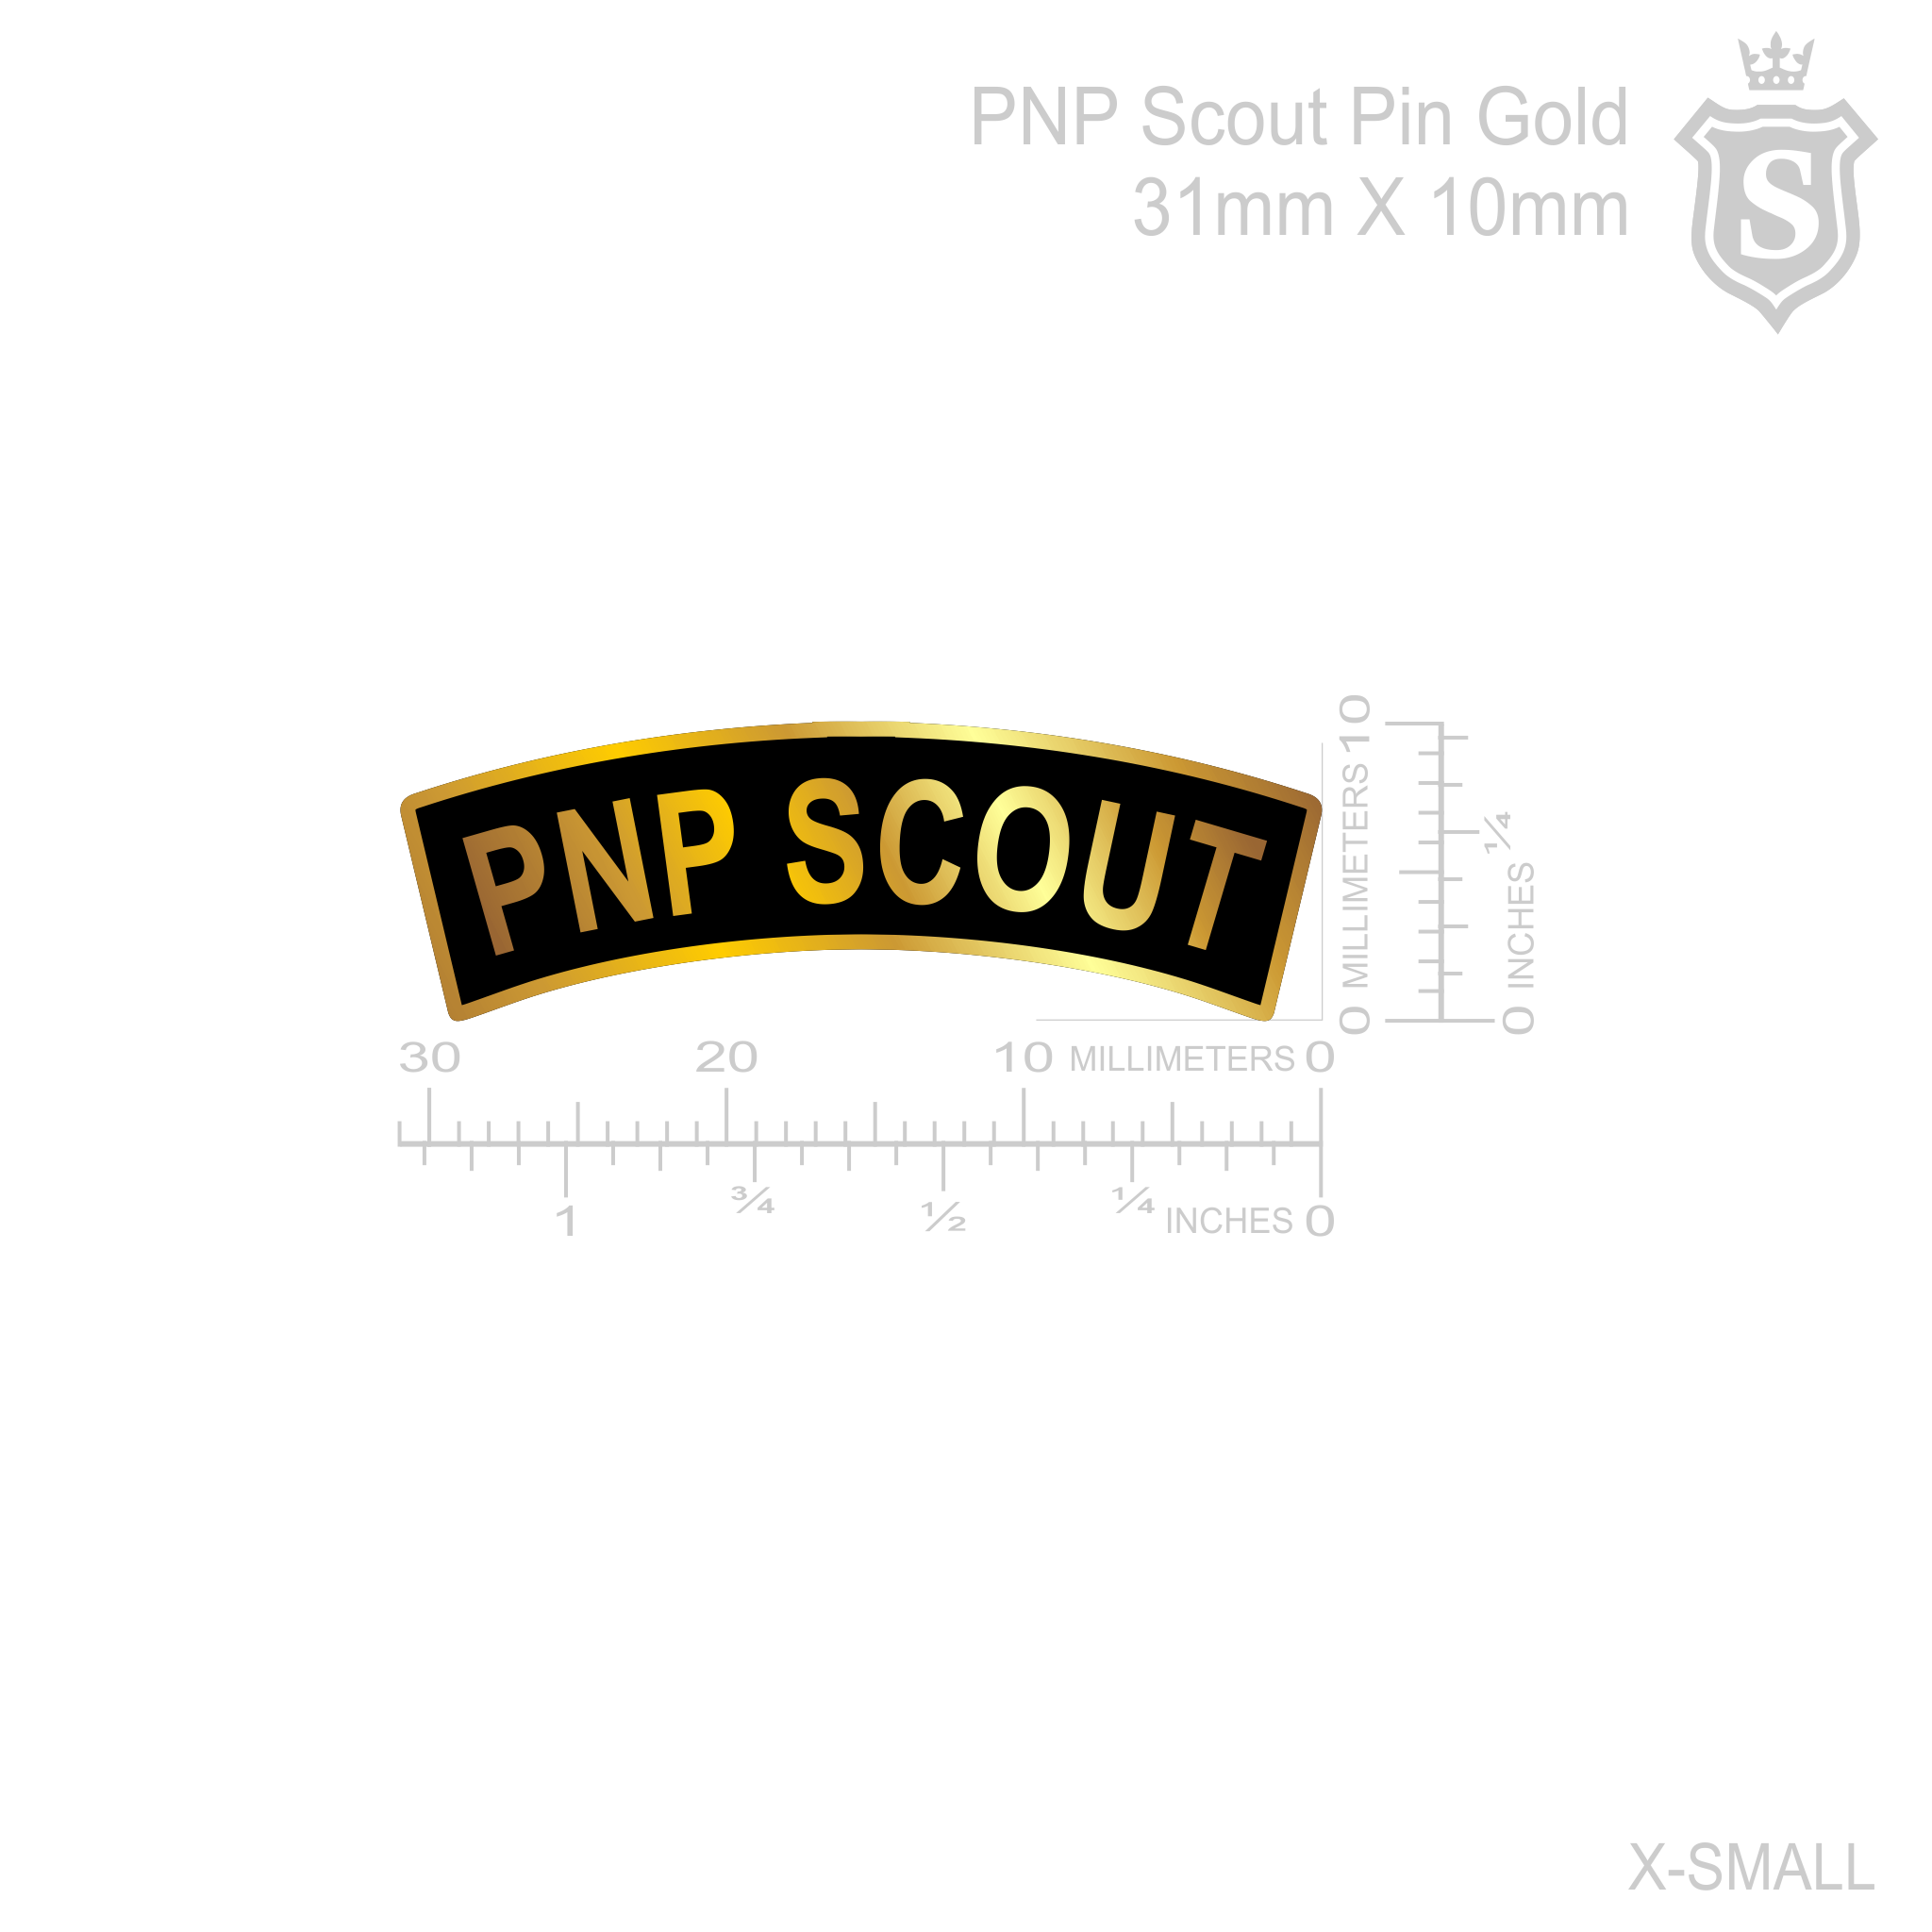 Philippine National Police (PNP) Scout Pin 31mmx10mm - PNP